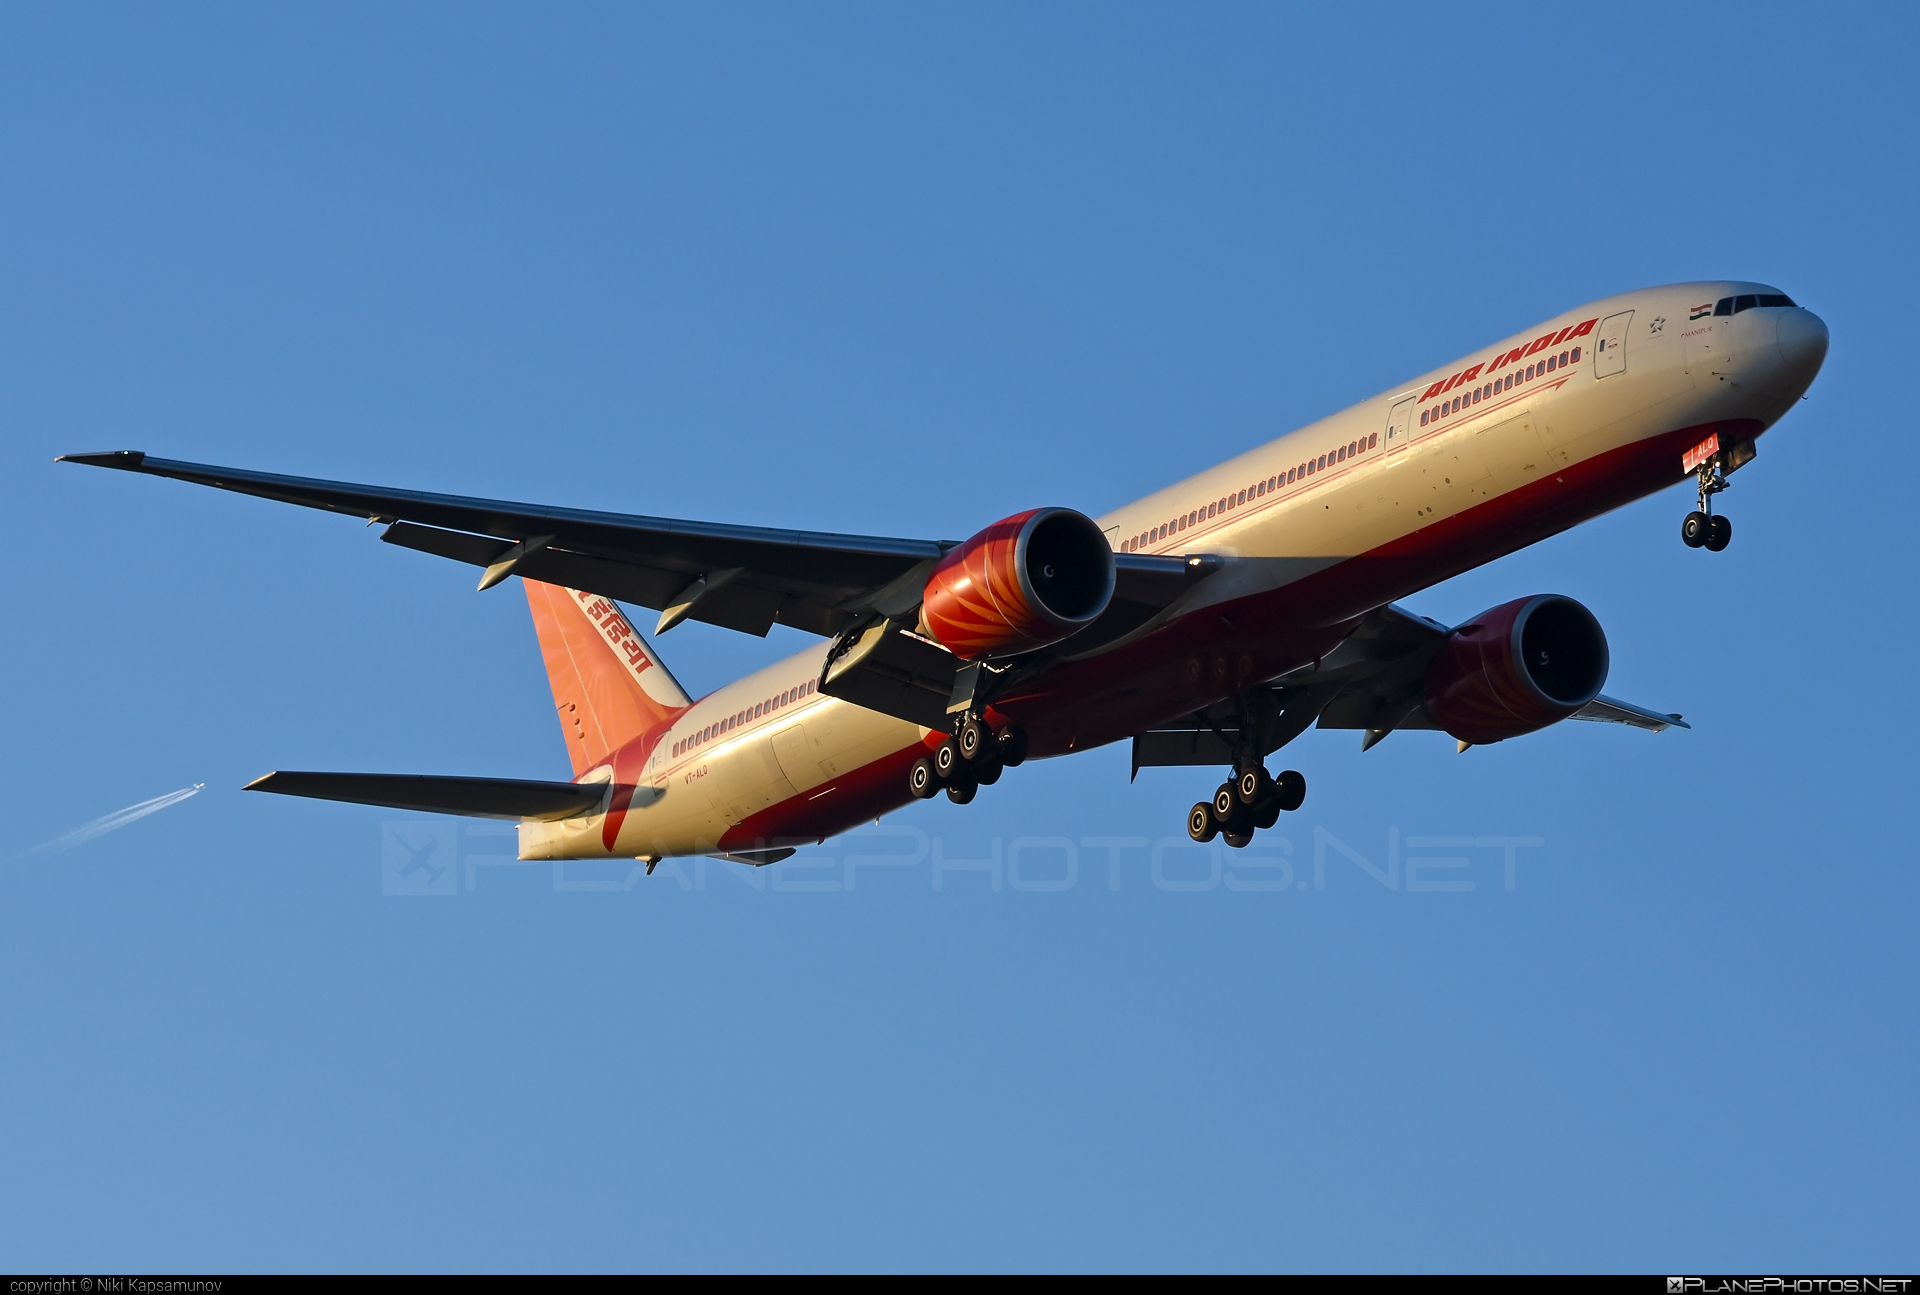 Boeing 777-300ER - VT-ALQ operated by Air India #airindia #b777 #b777er #boeing #boeing777 #tripleseven